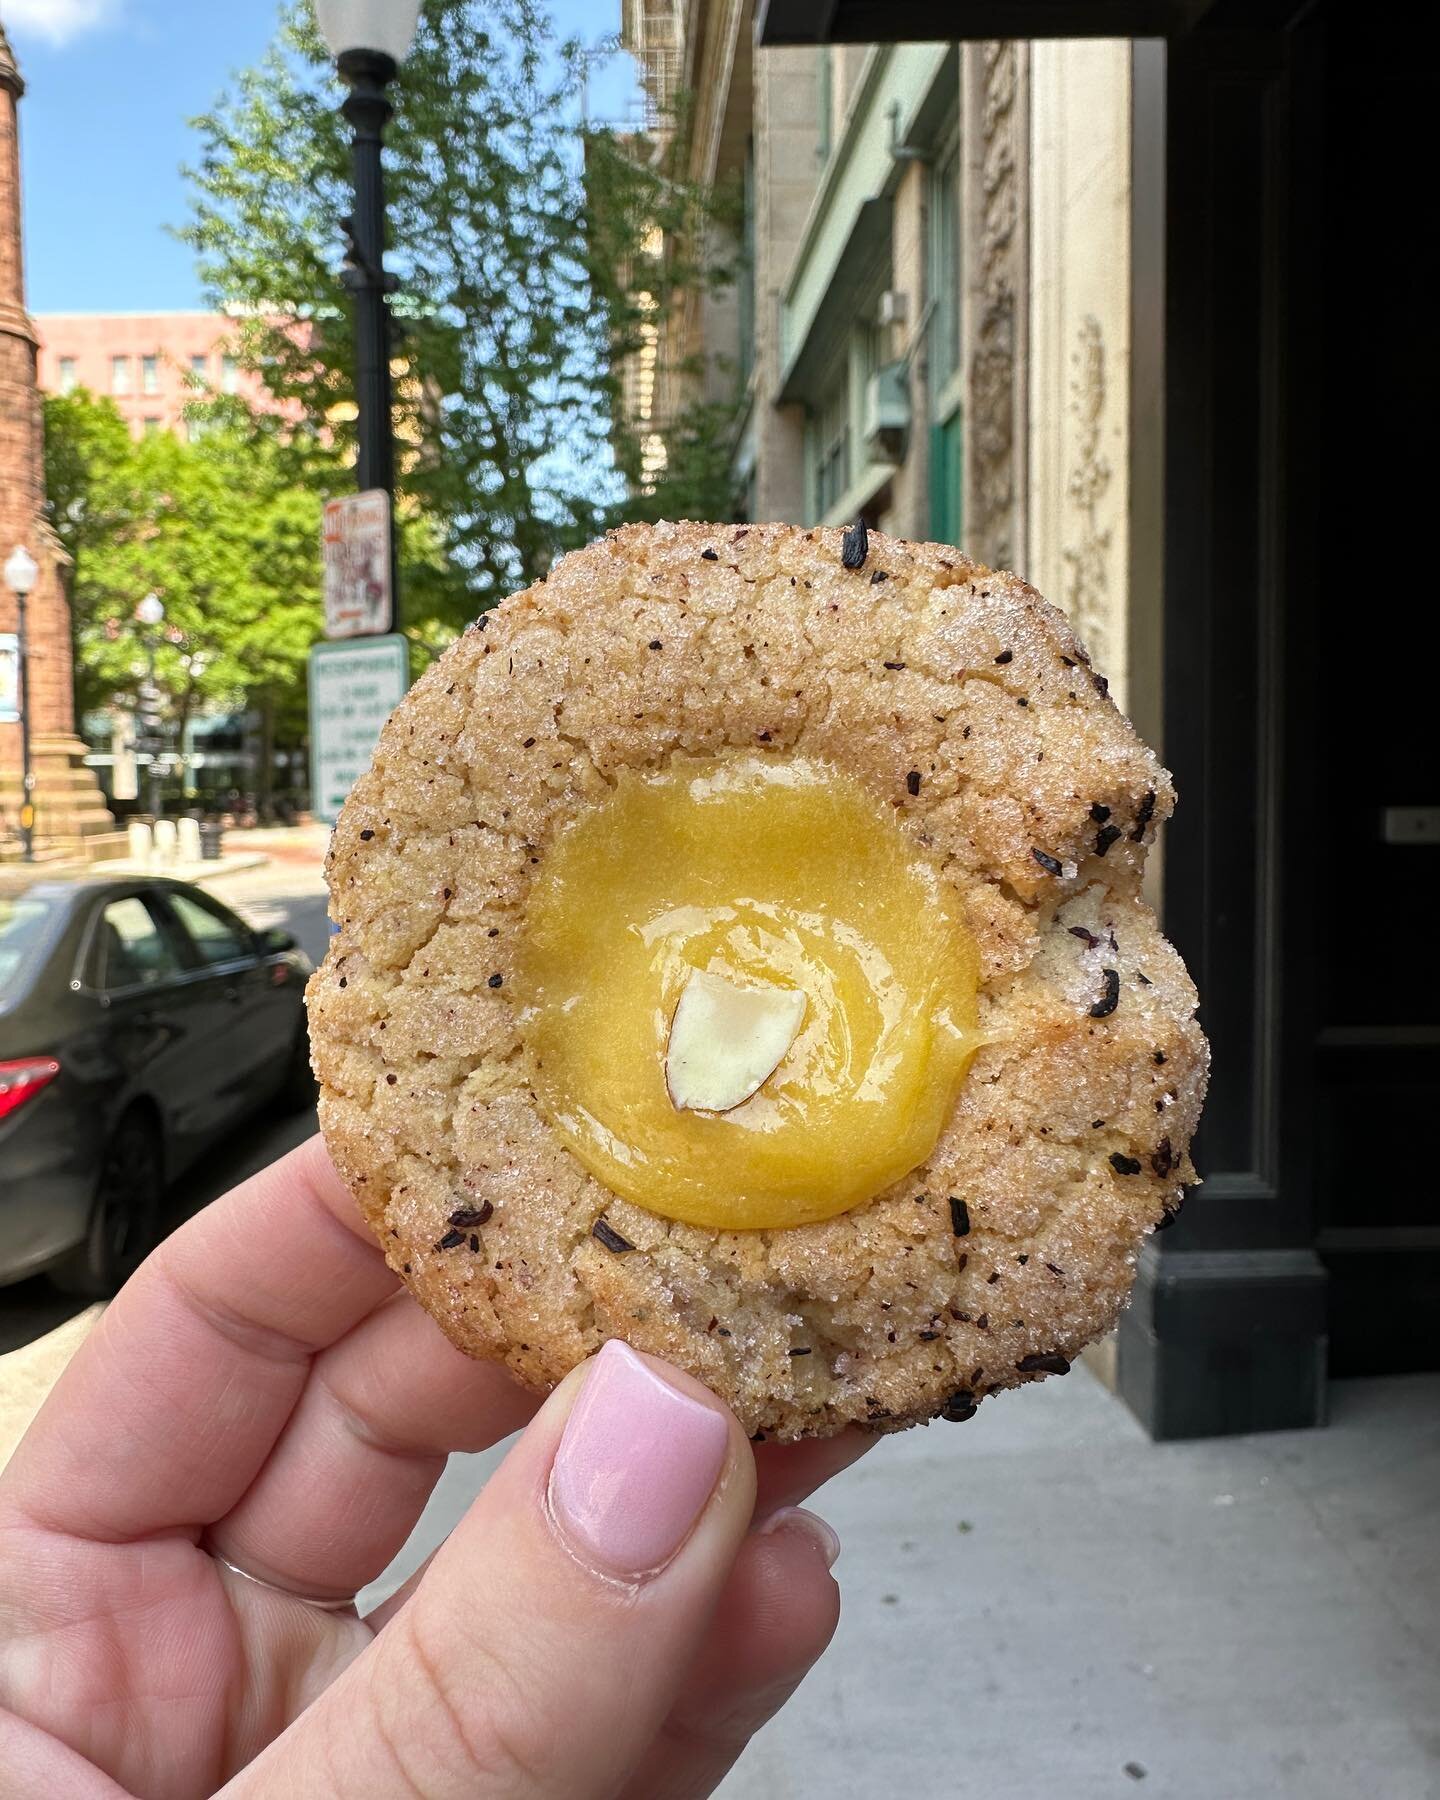 Grapefruit hibiscus cookie and a sun-dried tomato breakfast sandy is a great way to start a Sunday ✨

Grab a London fog to pair with this cookie and thank me later 
.
.
.
#providence #providenceri #providencecafe #pvd #pvdeats #rhodeisland #rhodyeats